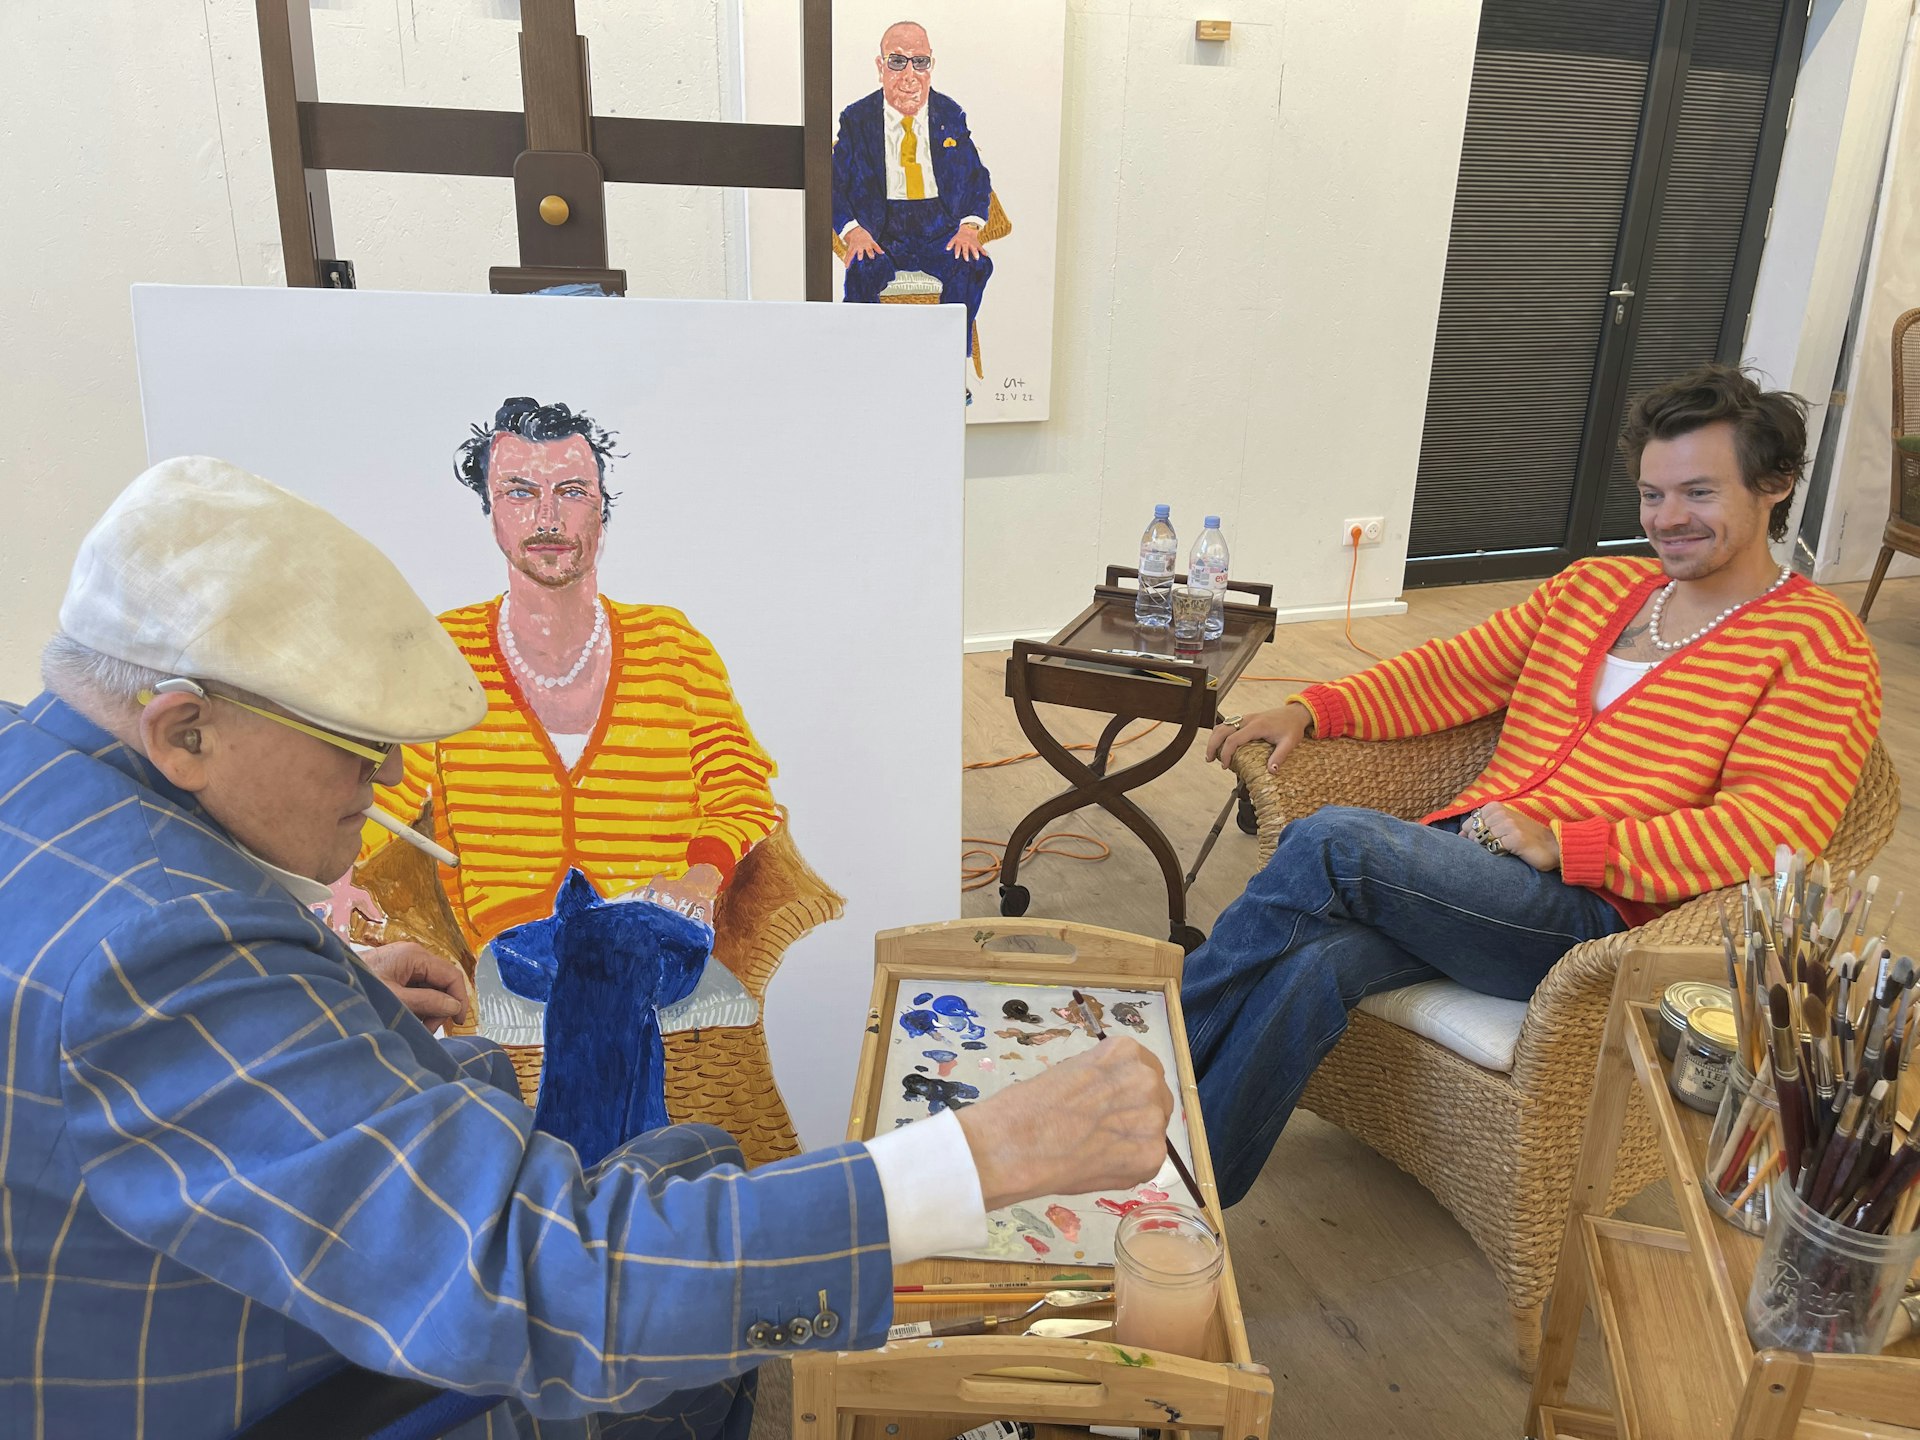 David Hockney painting Harry Styles (with "Portrait of Clive Davis" in background) at Normandy Studio, London, UK